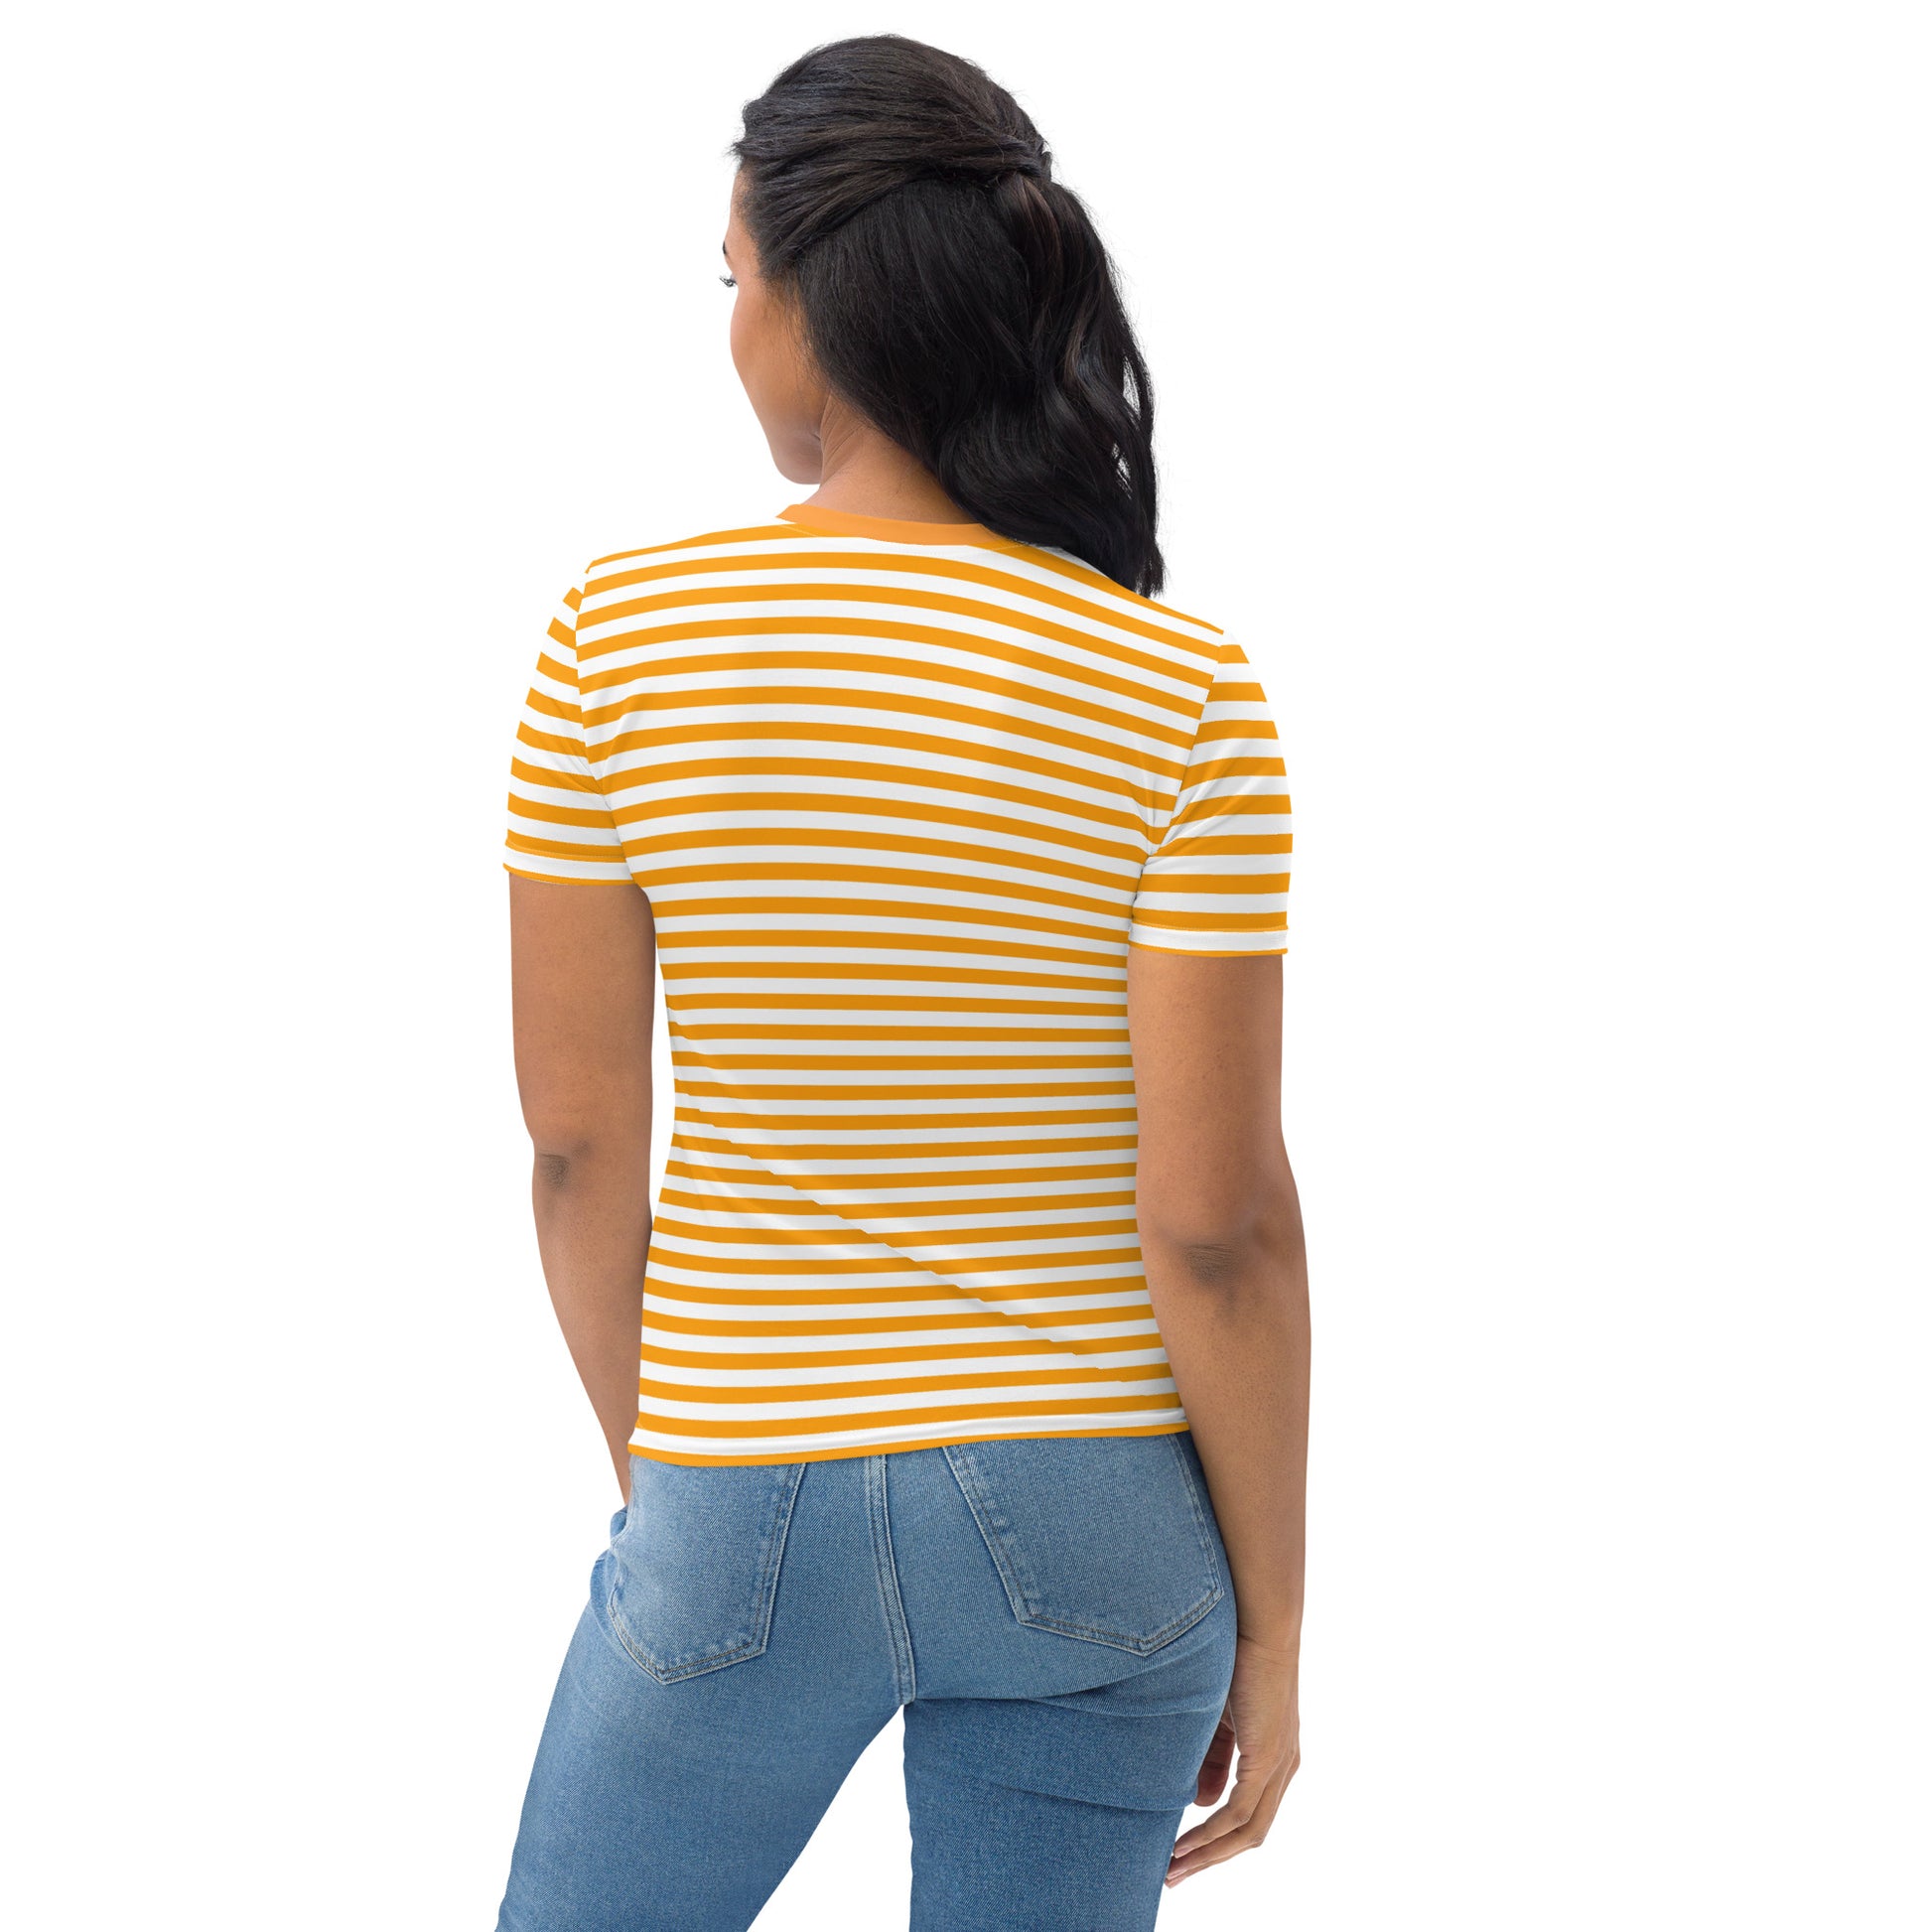 Orange and white striped t-shirt with a relaxed fit